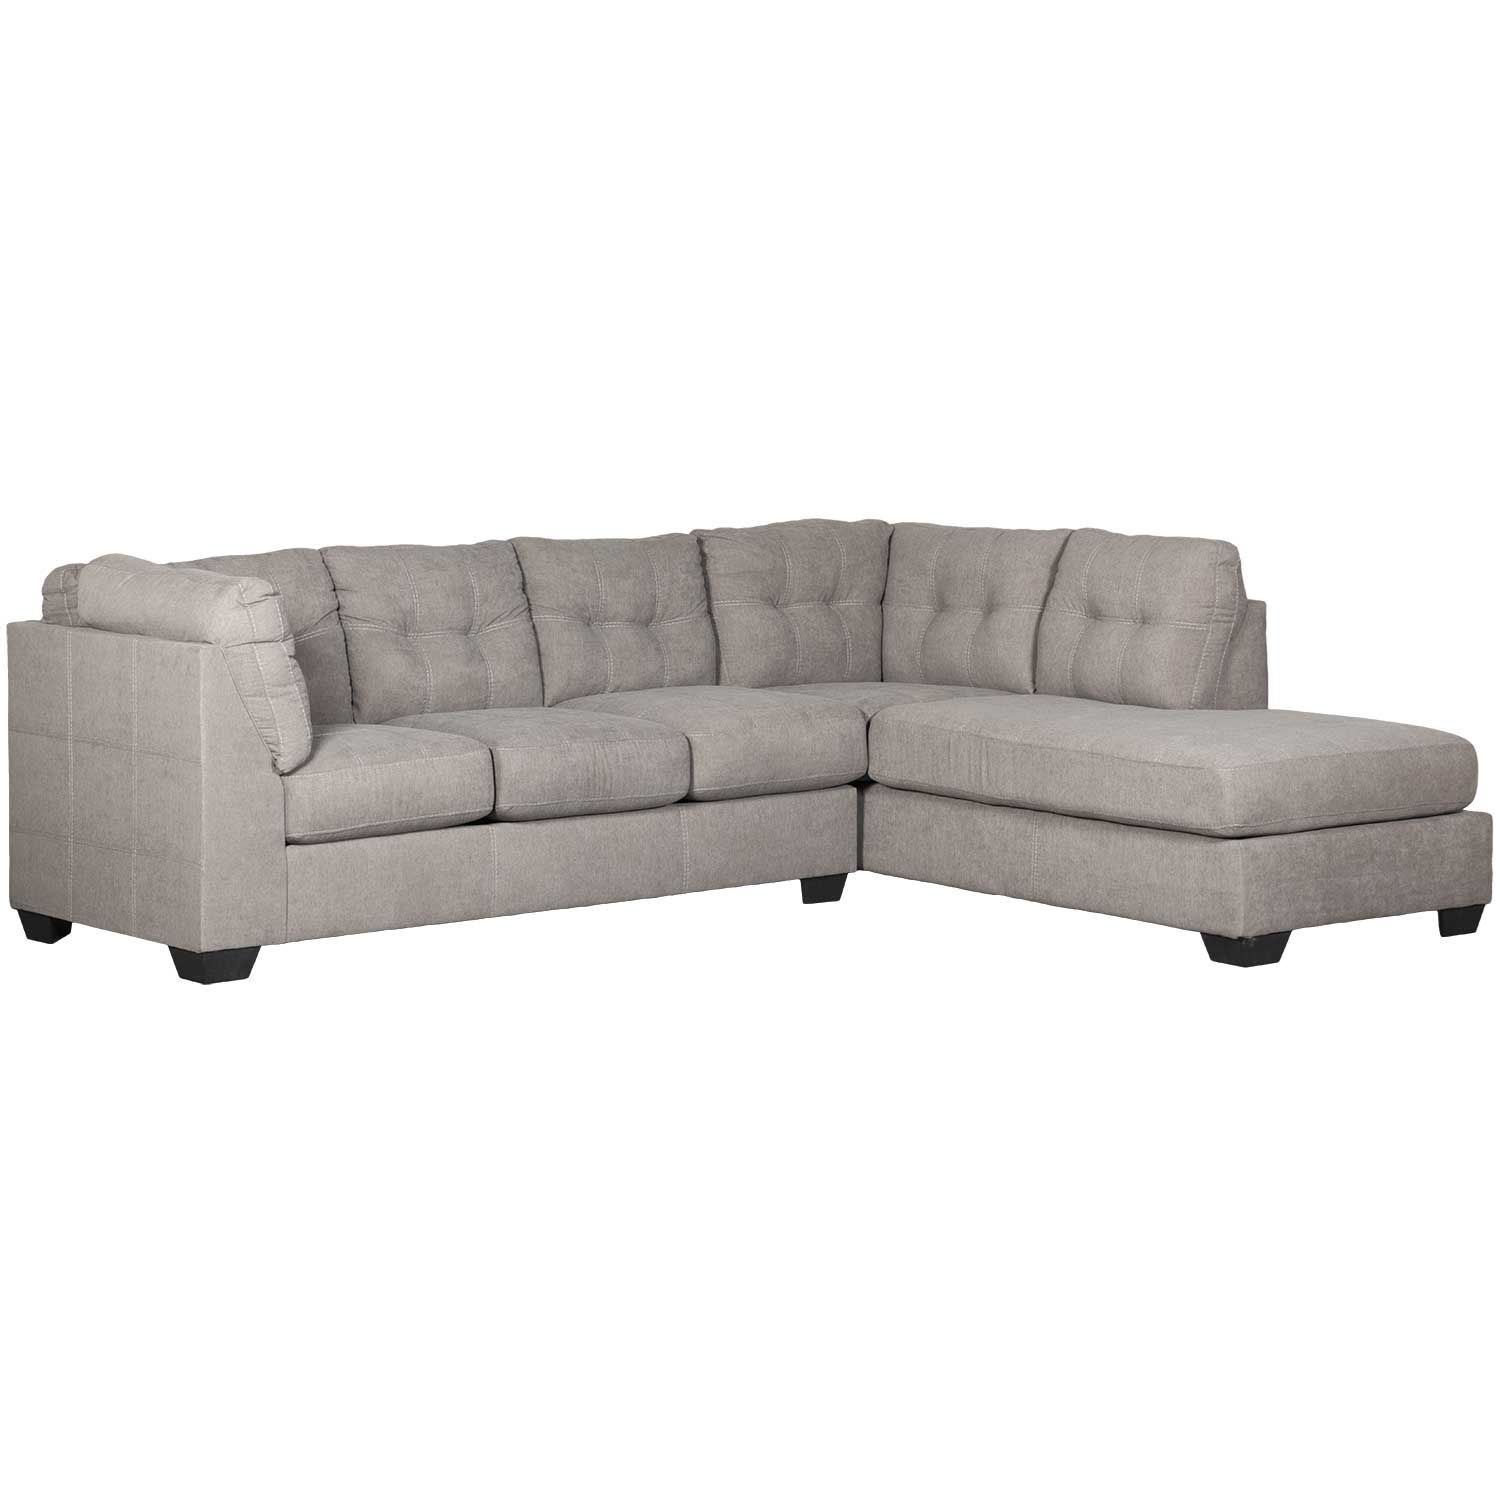 Maier Charcoal 2 Piece Sectional With Raf Chaise Regarding 2Pc Burland Contemporary Sectional Sofas Charcoal (View 9 of 15)